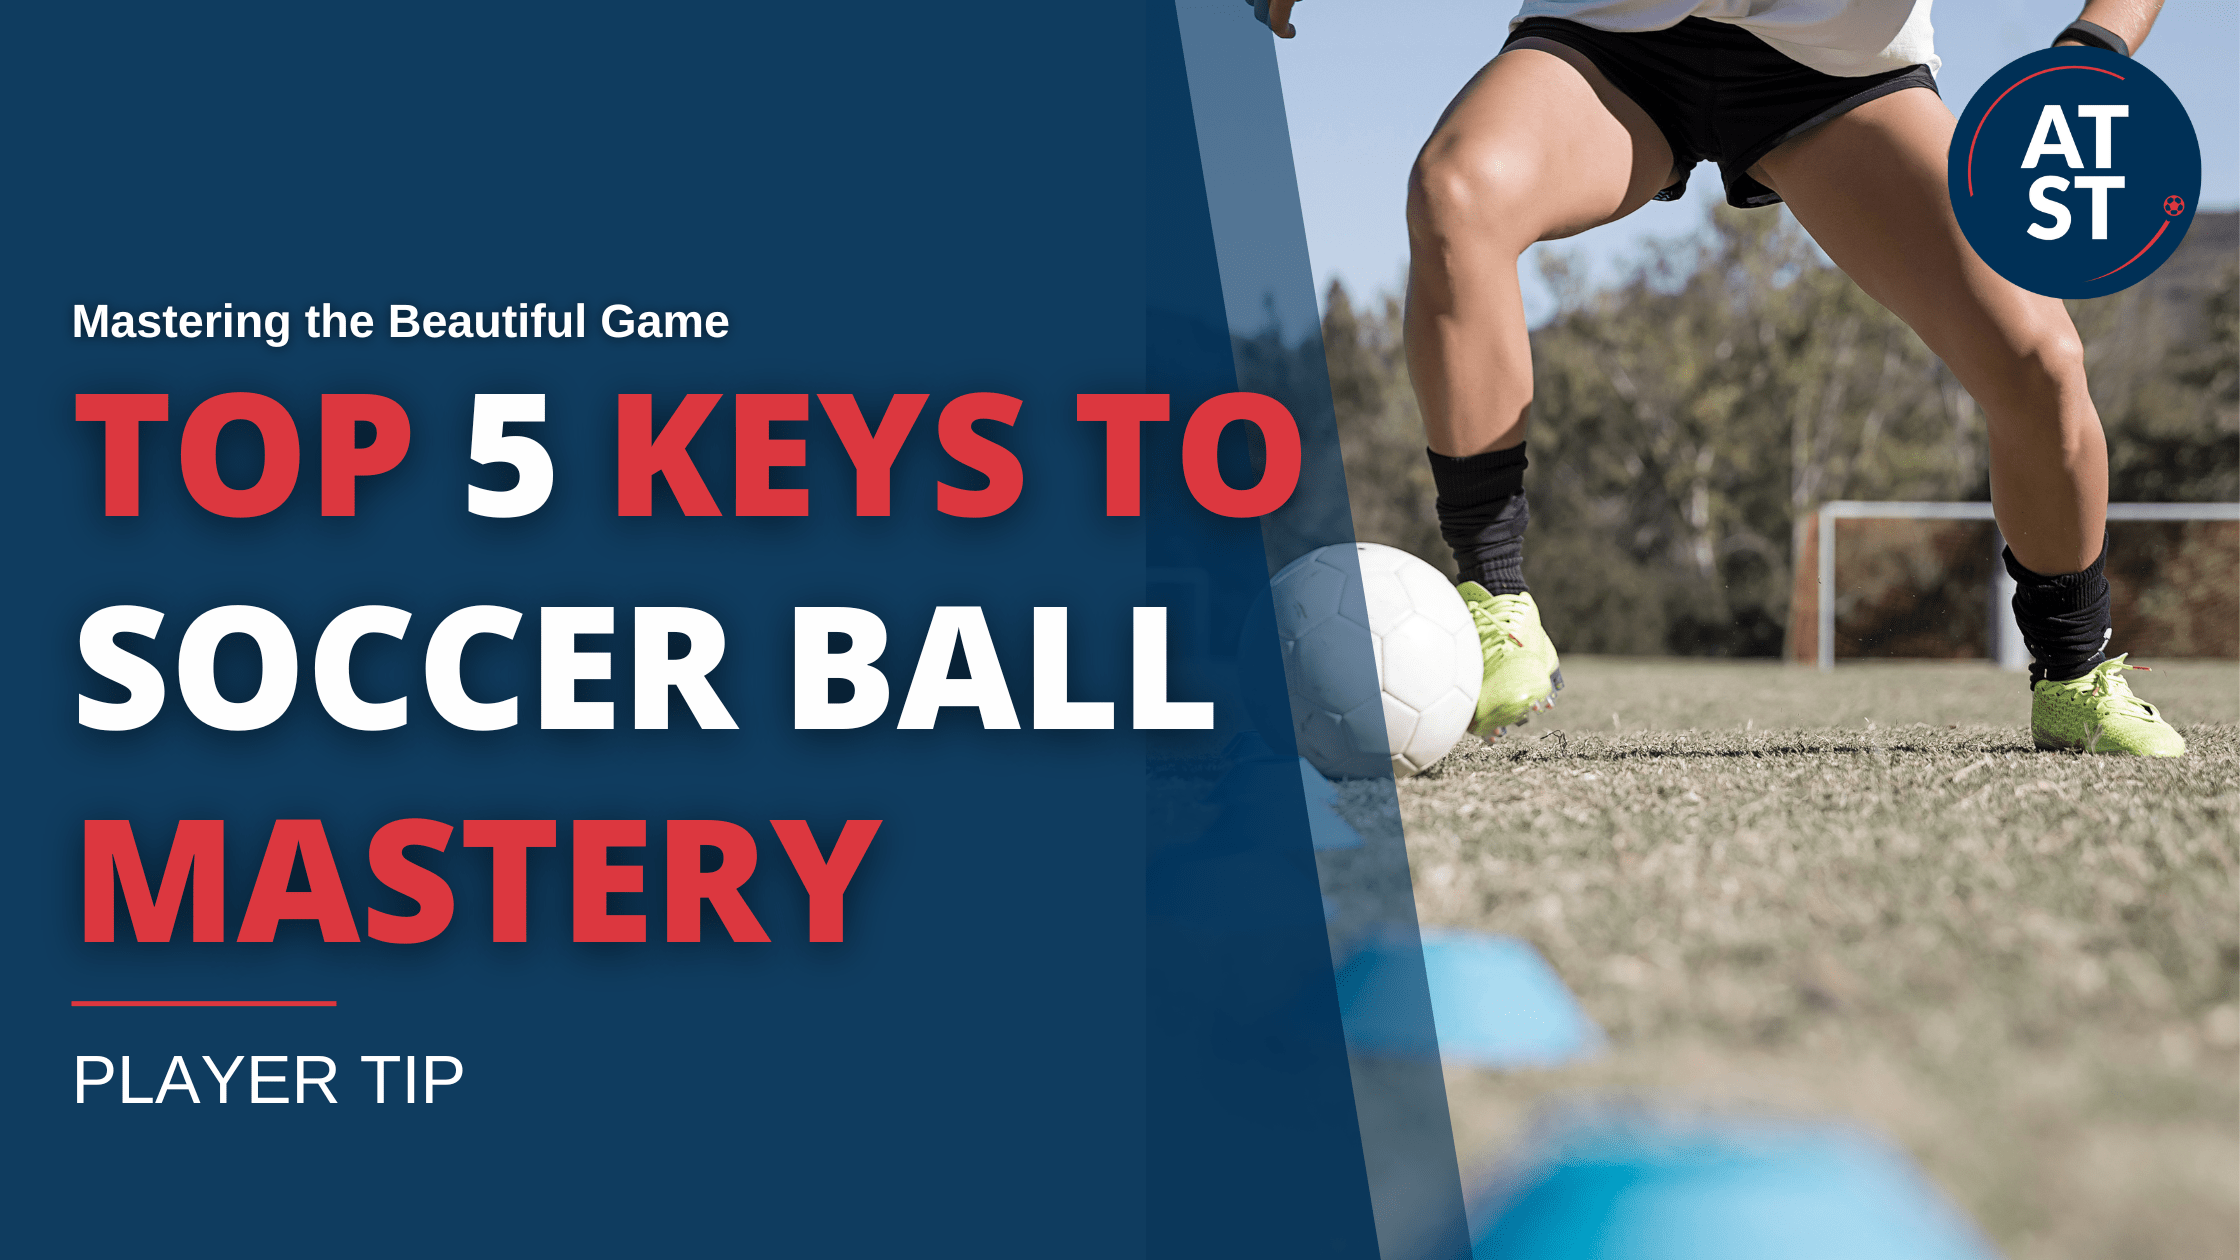 Mastering the Beautiful Game: The Top 5 Keys to Soccer Ball Mastery